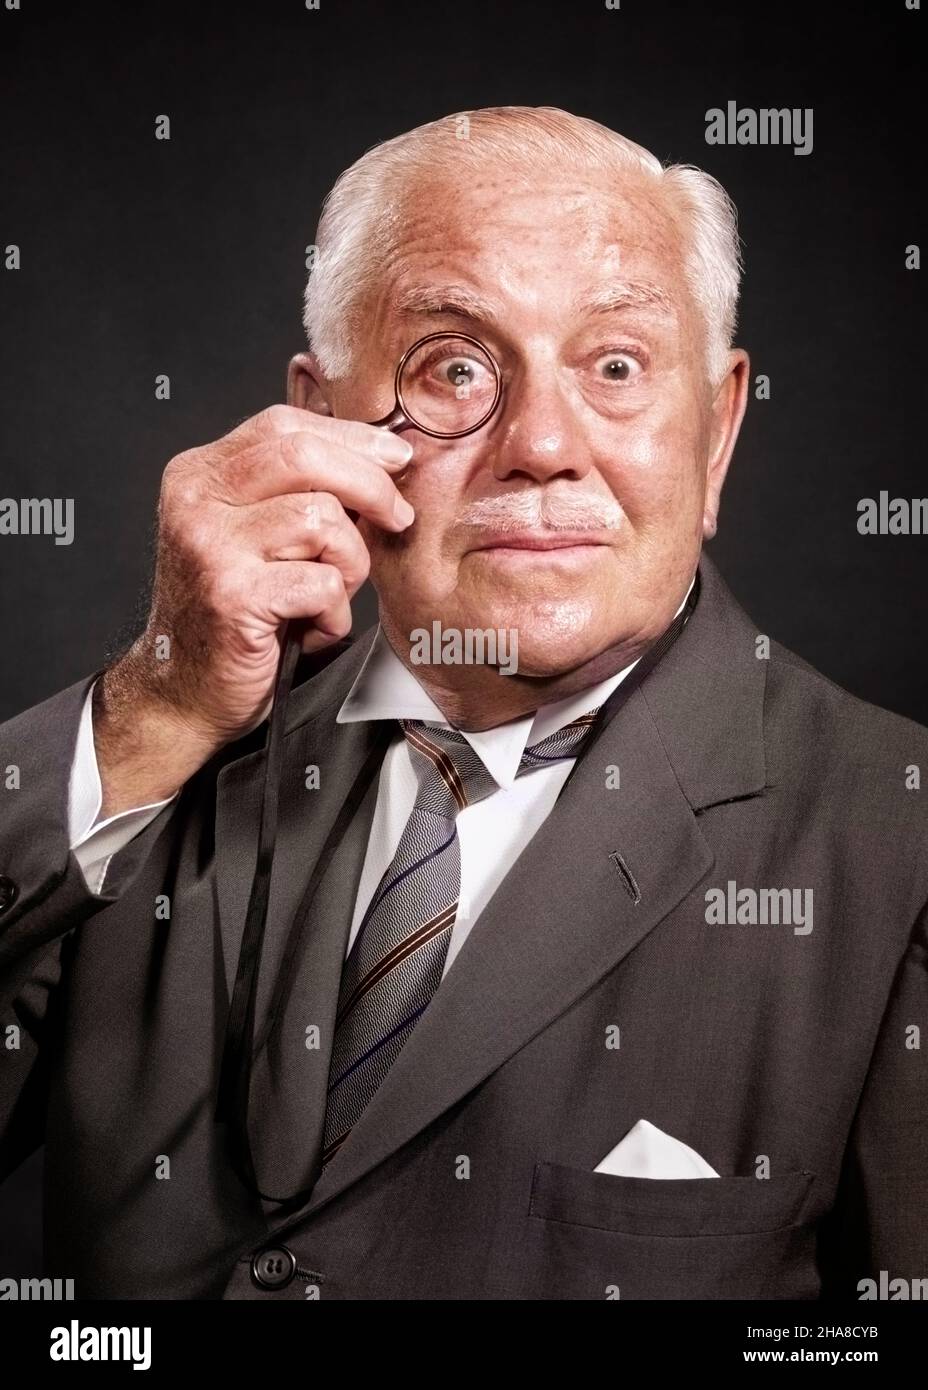 1950s 1960s SURPRISED SENIOR BUSINESSMAN MAN LOOKING AT CAMERA THROUGH MONOCLE WITH FUNNY ALARMED FACIAL EXPRESSION - p1008c HAR001 HARS WEALTHY BRITISH LIFESTYLE ELDER STUDIO SHOT PORTRAITS GROWNUP COPY SPACE HALF-LENGTH PERSONS GROWN-UP CHARACTER MALES SENIOR MAN SENIOR ADULT AMAZED LENS EYE CONTACT MUSTACHE VISION WONDER BUG-EYED AWE HUMOROUS OLDSTERS OLDSTER DISCOVERY STYLES CHARACTERS EXCITEMENT FACIAL HAIR ELDERS OUTRAGED SURPRISING ARISTOCRAT STYLISH MONOCLE WING COLLAR WIDE-EYED AGHAST EYEGLASS FASHIONS PEOPLE ADULTS ALARMED AMAZEMENT ARISTOCRATIC CAUCASIAN ETHNICITY HAR001 IMPERIOUS Stock Photo